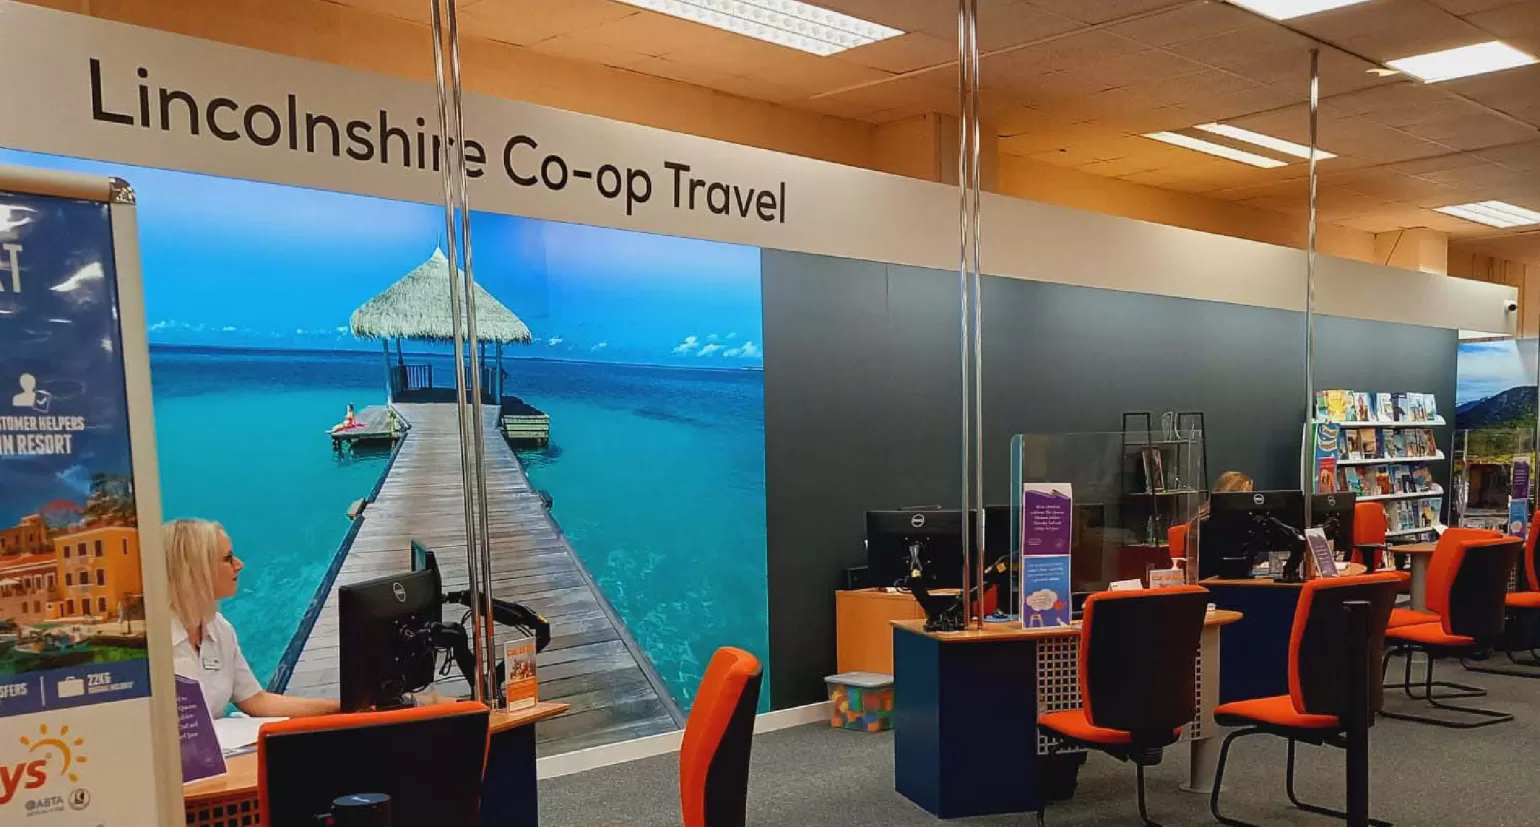 Monday - Saturday 9am - 5pm

Except Wednesdays - opens 9.45am

Travel money closes at 4.30pm

Closed on Sundays and Bank Holidays

To get in contact please call 01205 312 560.

Please note this number is for the Co-op Travel only. 
